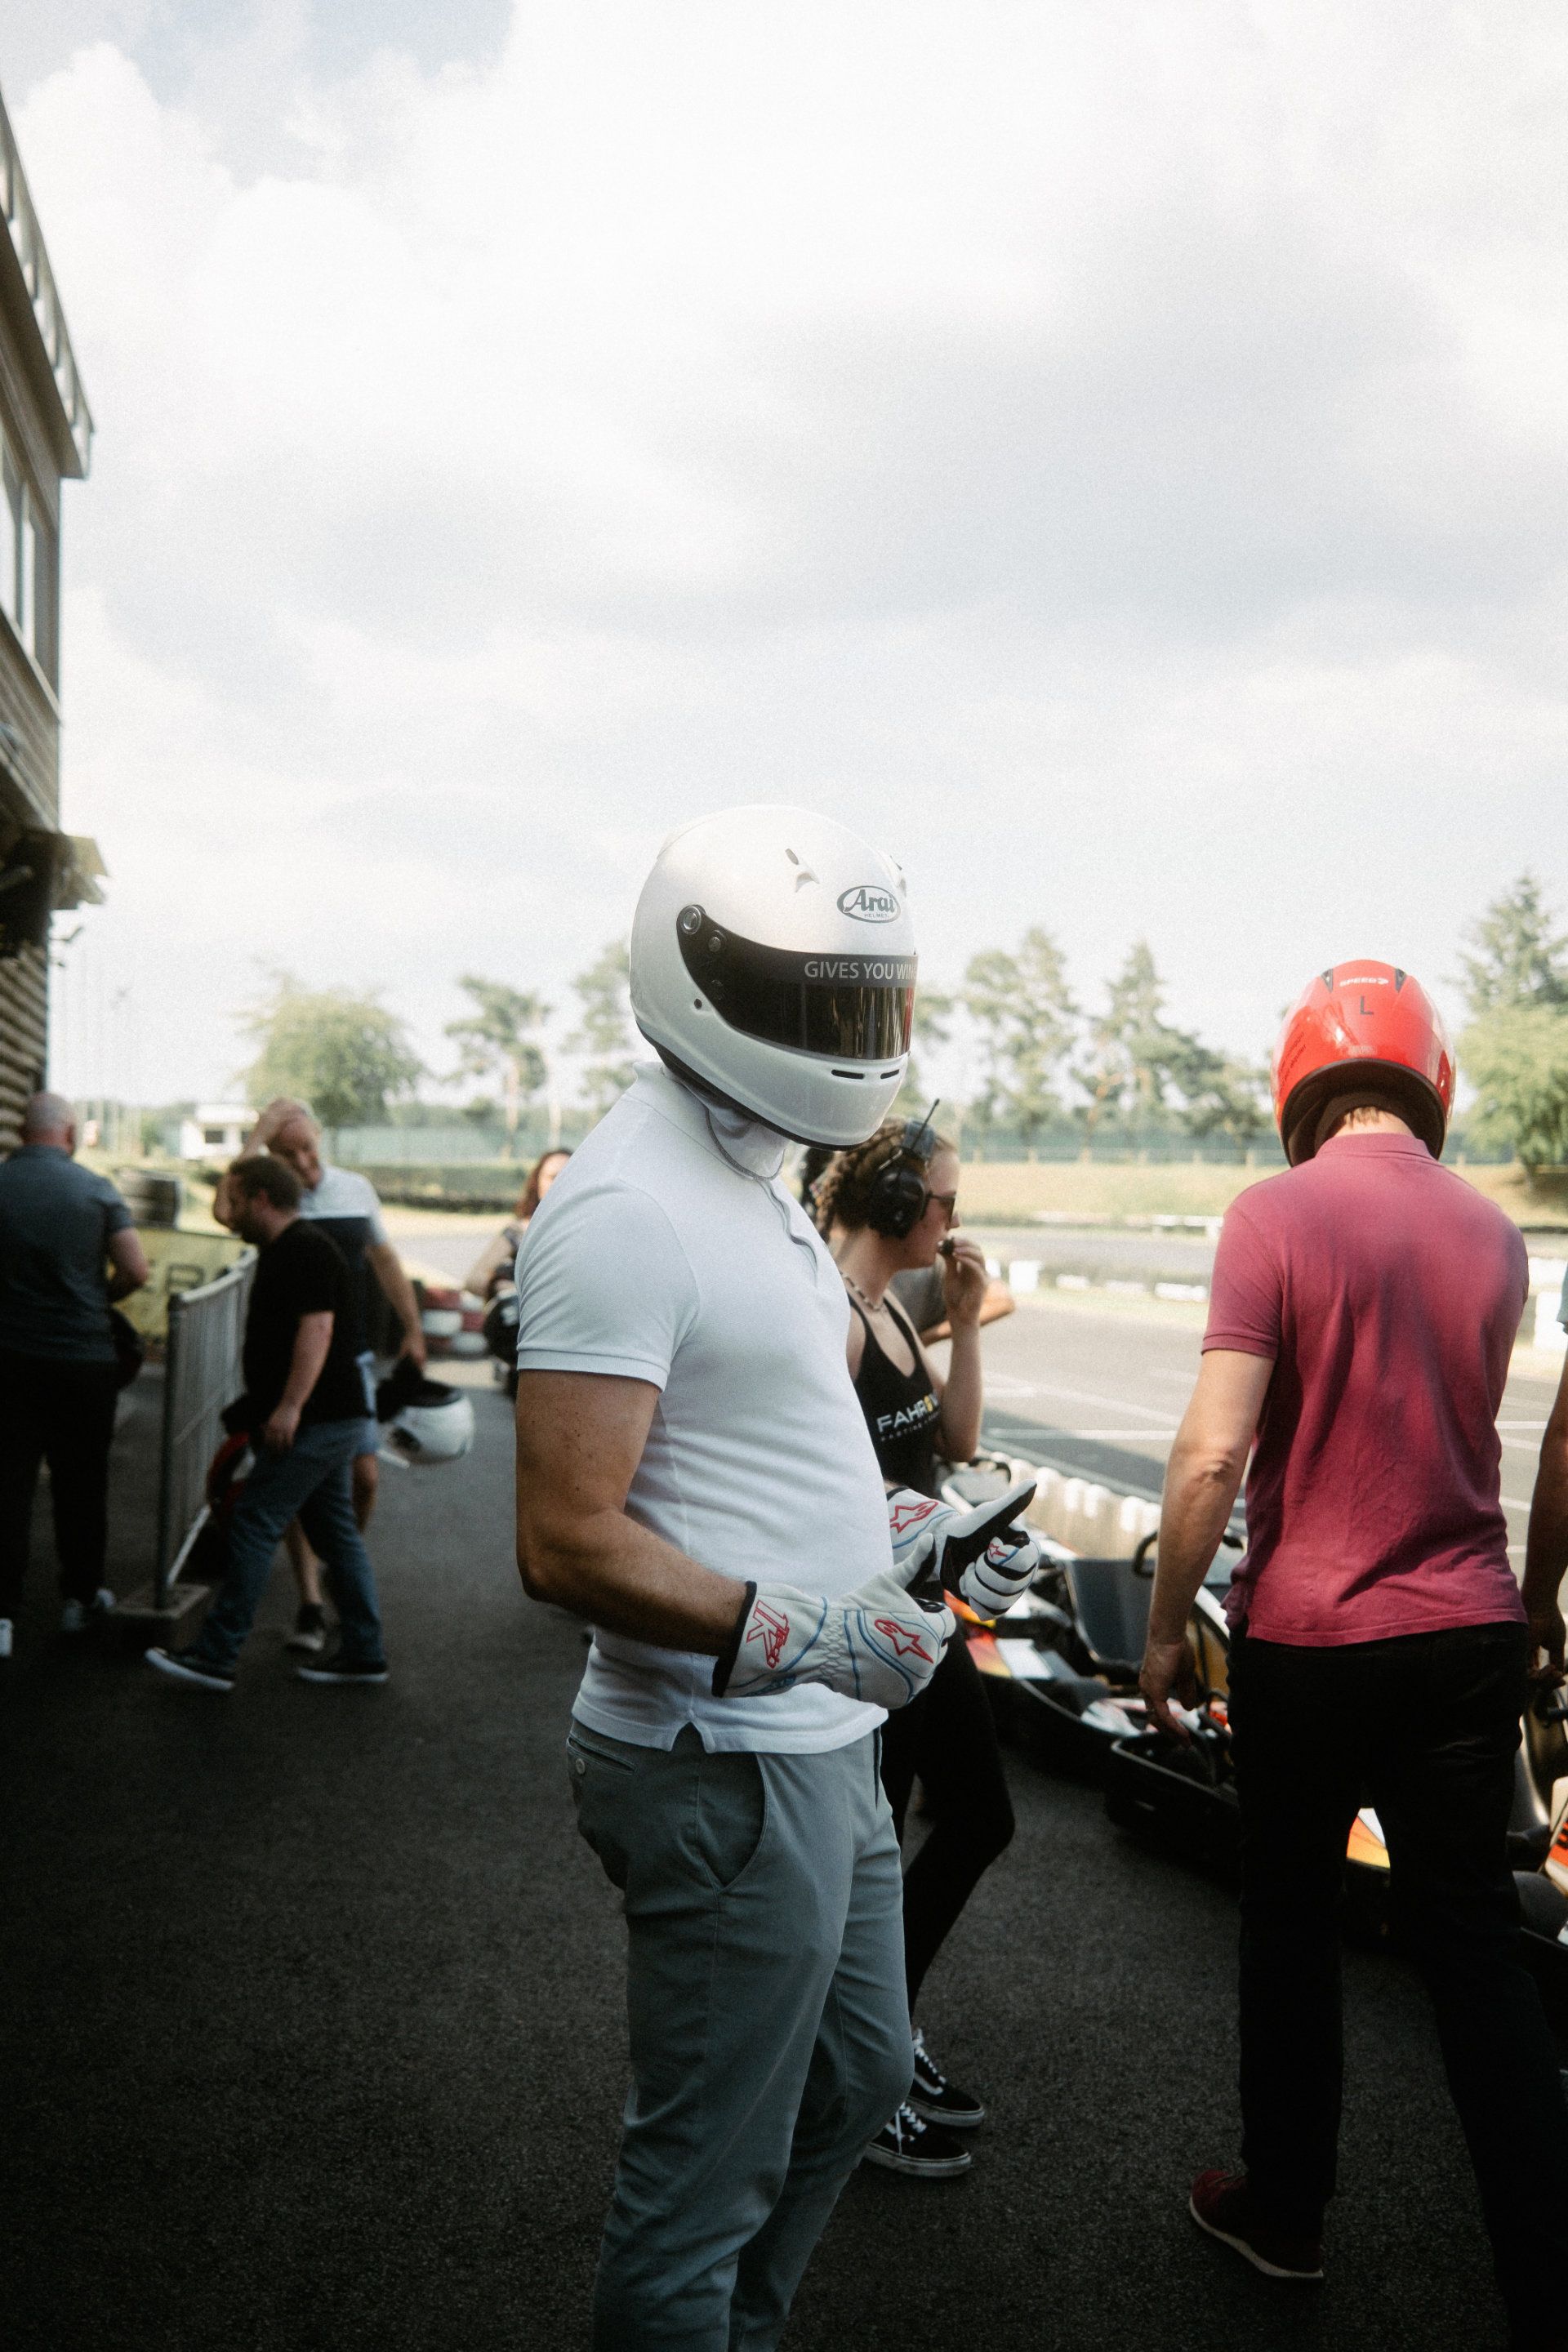 A driver in a white helmet and race gloves awaits the start of a go-kart race, anticipation and focus palpable in the air, an ideal scene for event photography.